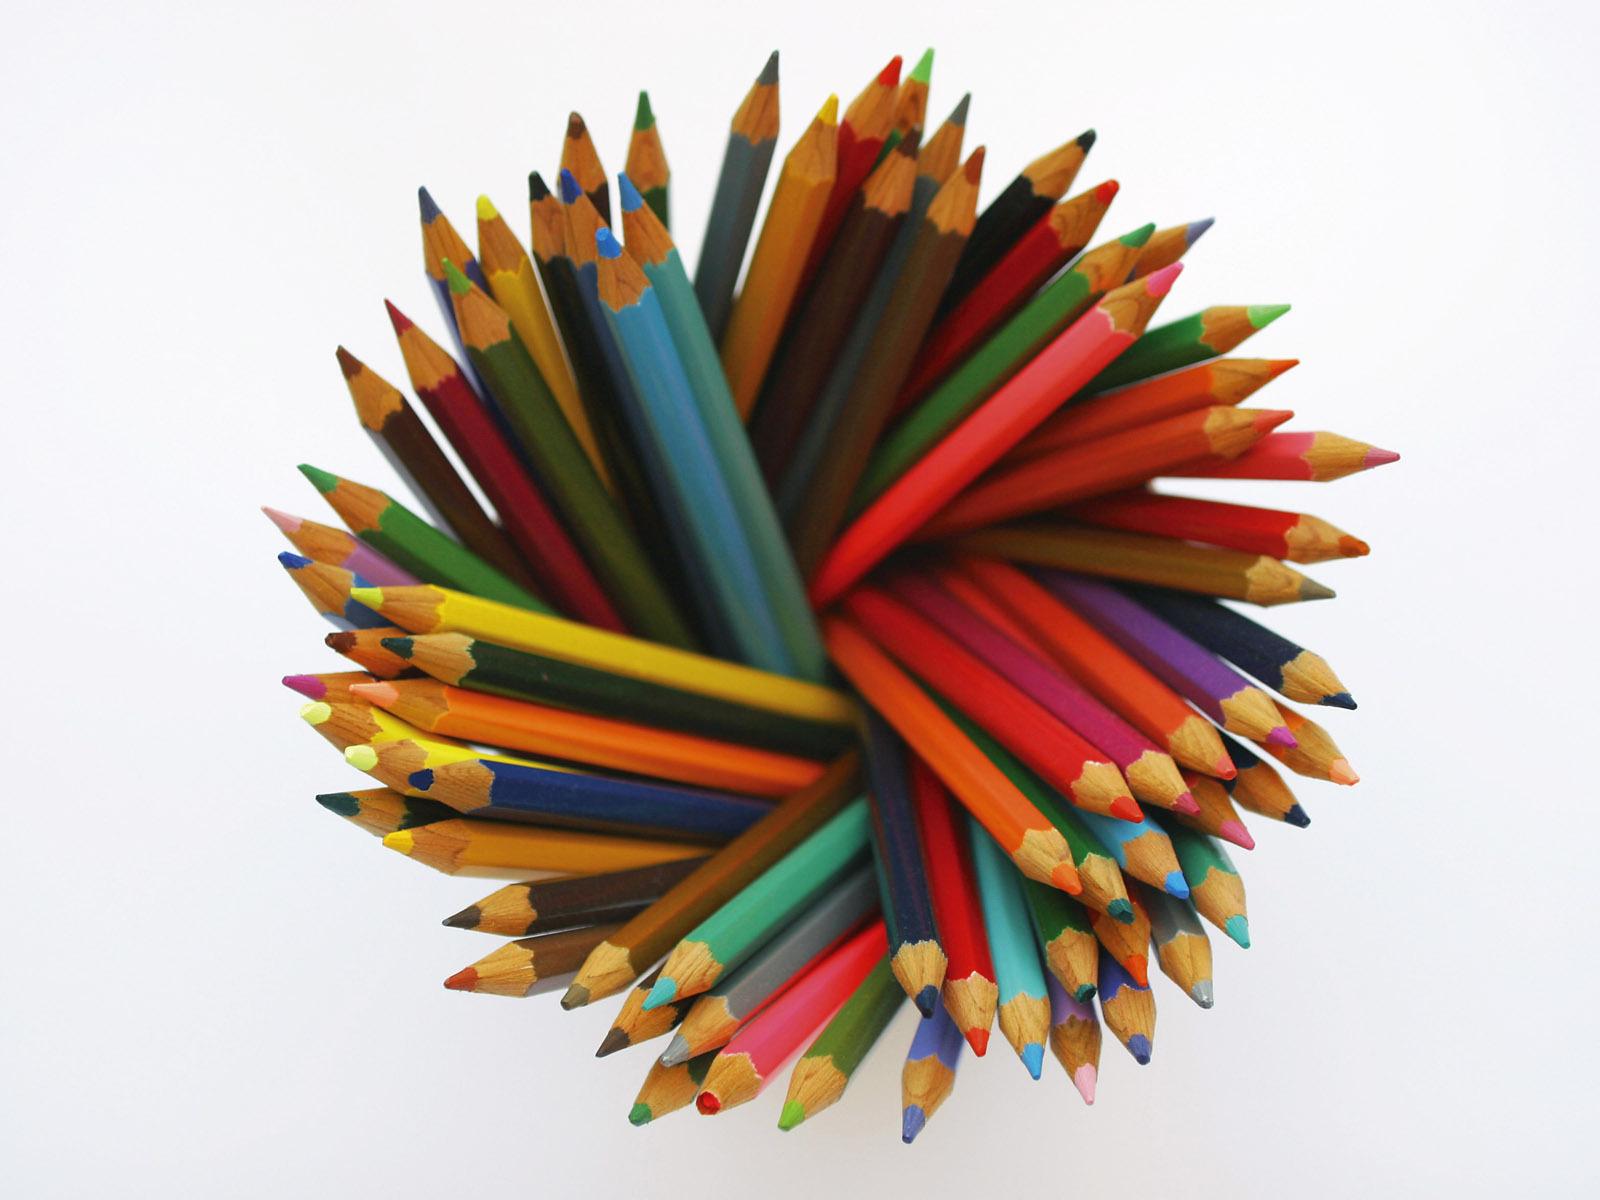 Pencils image Colored pencils HD wallpaper and background photo